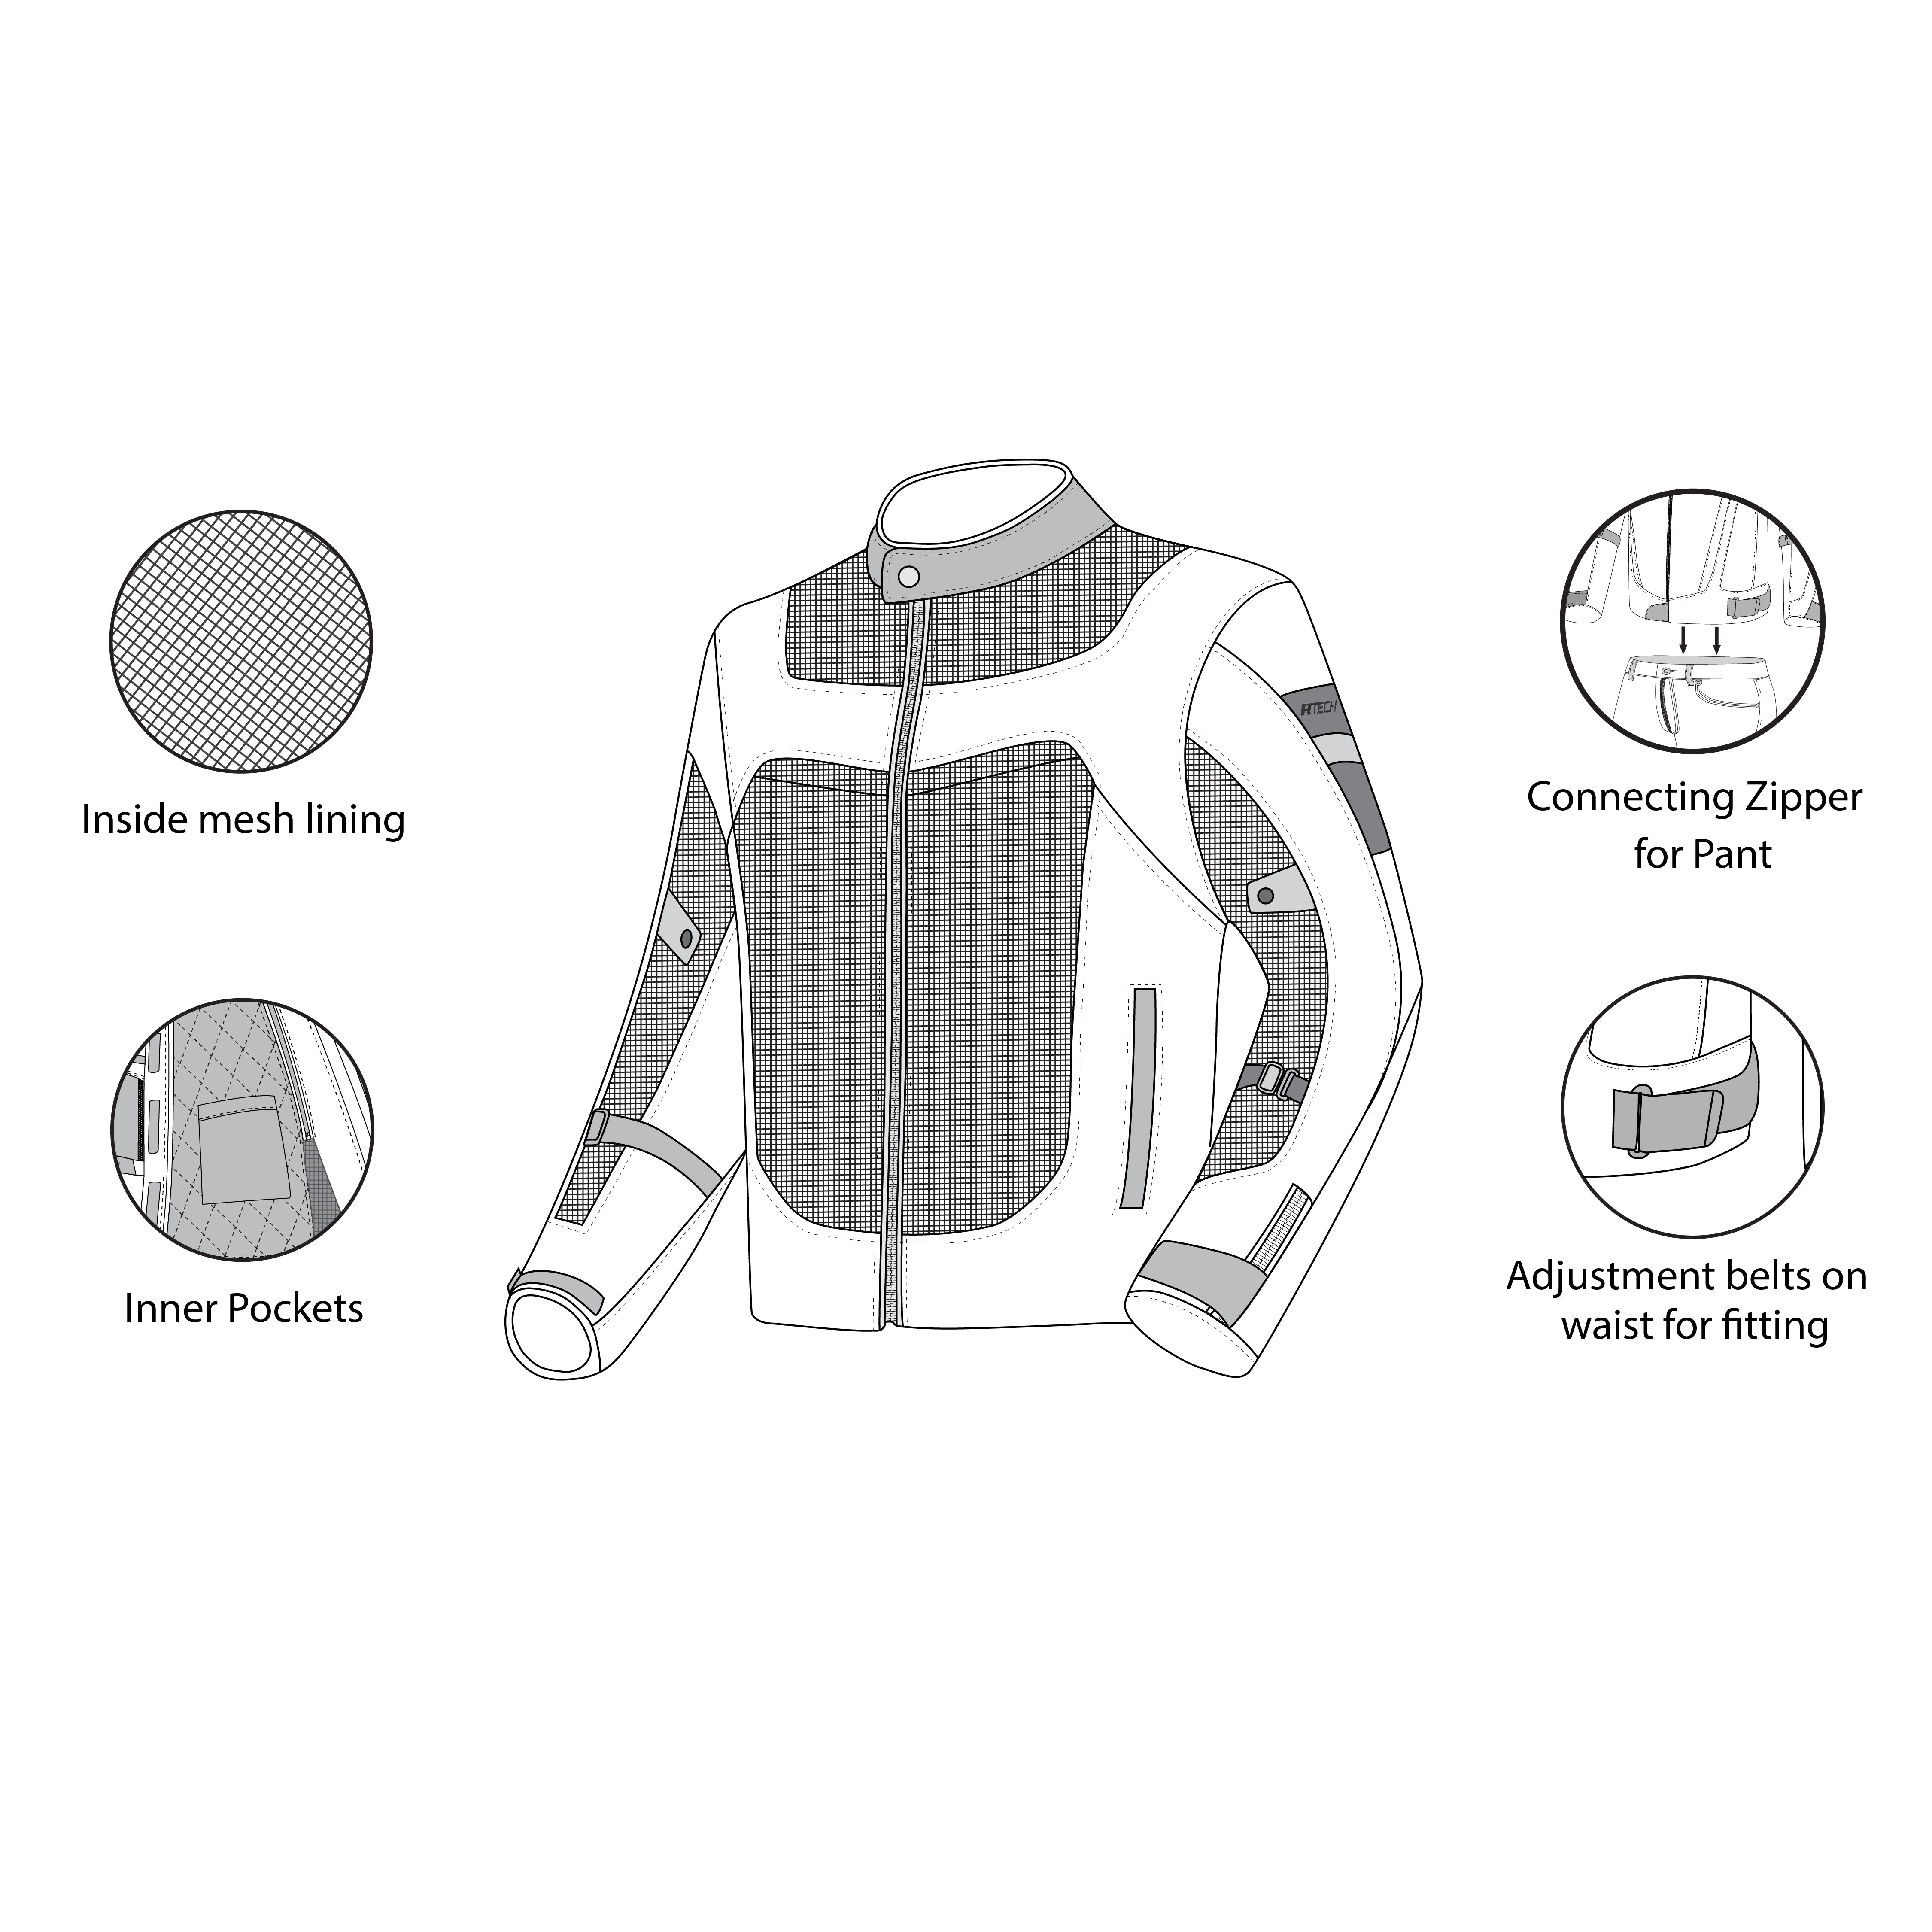 infographic sketch r-tech spiral mesh textile jacket blue, gray and red top front side view